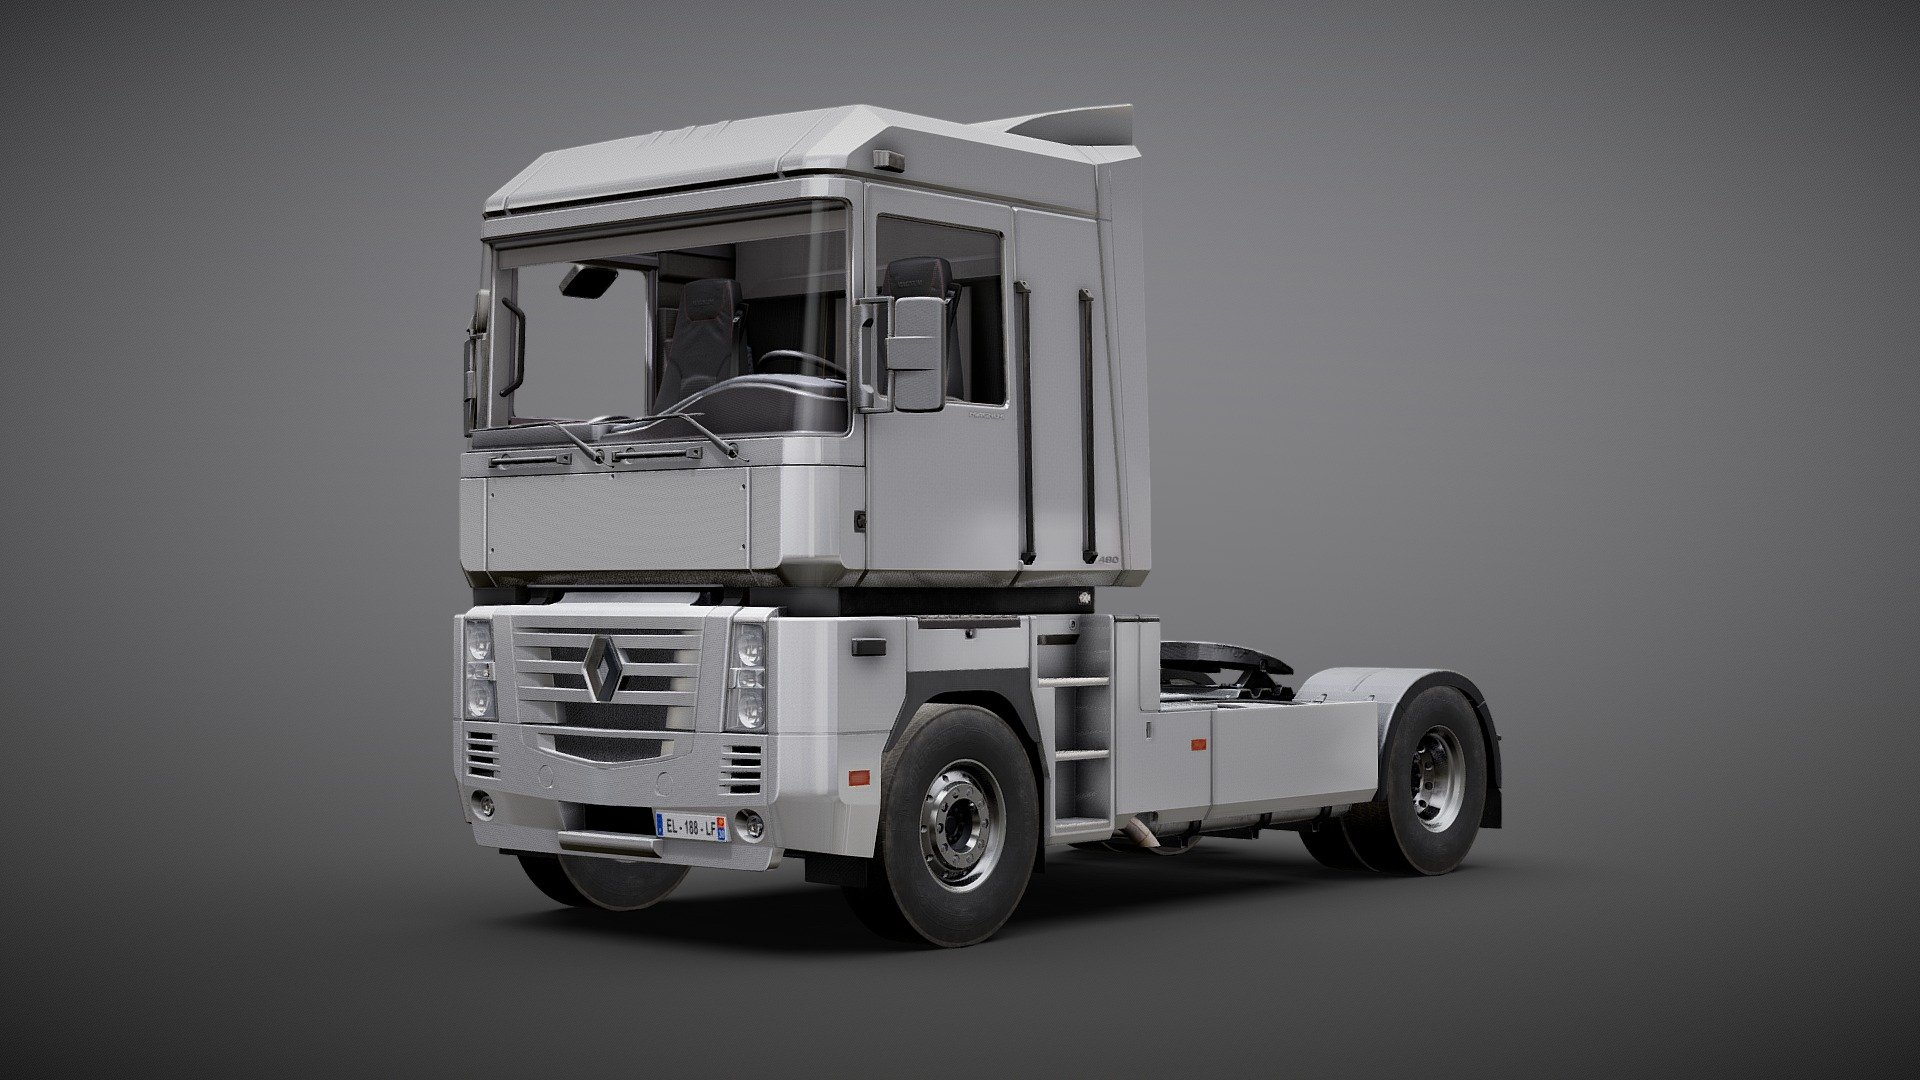 This is a Renault Magnum from 2002 with a 480hp Mack Engine.

It’s a Game ready mesh modeled with Blender and textured with Substance Painter and Photoshop.

Technical details

There is the .blend, .fbx and .obj files

14x Materials for Exterior &amp; Cabin. (You can choose the color you want for the truck paint.)

55x PBR 2K textures (Albedo, Metalness, Roughness, Normal &amp; AO)

240k Triangles

130k Vertices

Model completely unwrapped &amp; fully textured.

Model scaled to the real size vehicle.


For additional support, please feel free to contact me— I am happy to help out!

Please do not sell, repackage, or otherwise redistribute the product without my permission.

Please consider crediting me and/or linking to my ArtStation on works using this product.

You like the model? Don’t hesitate to let met a review ! :) - 2002 Renault Magnum - Buy Royalty Free 3D model by MaximePages (@pagesm) 3d model